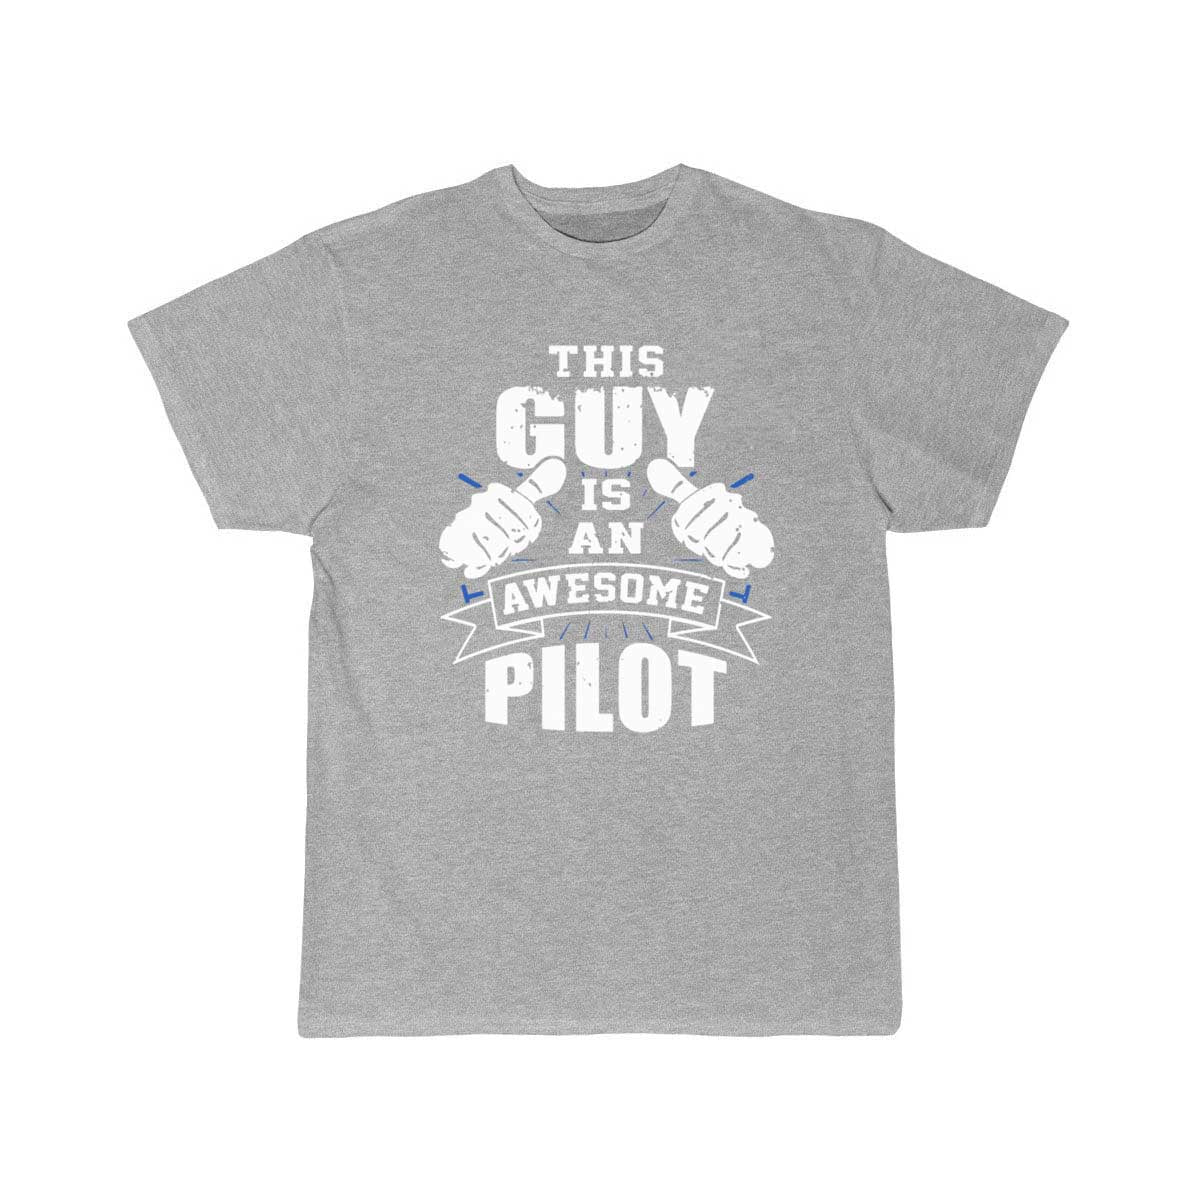 This Guy Is An Awesome Pilot Funny T-SHIRT THE AV8R